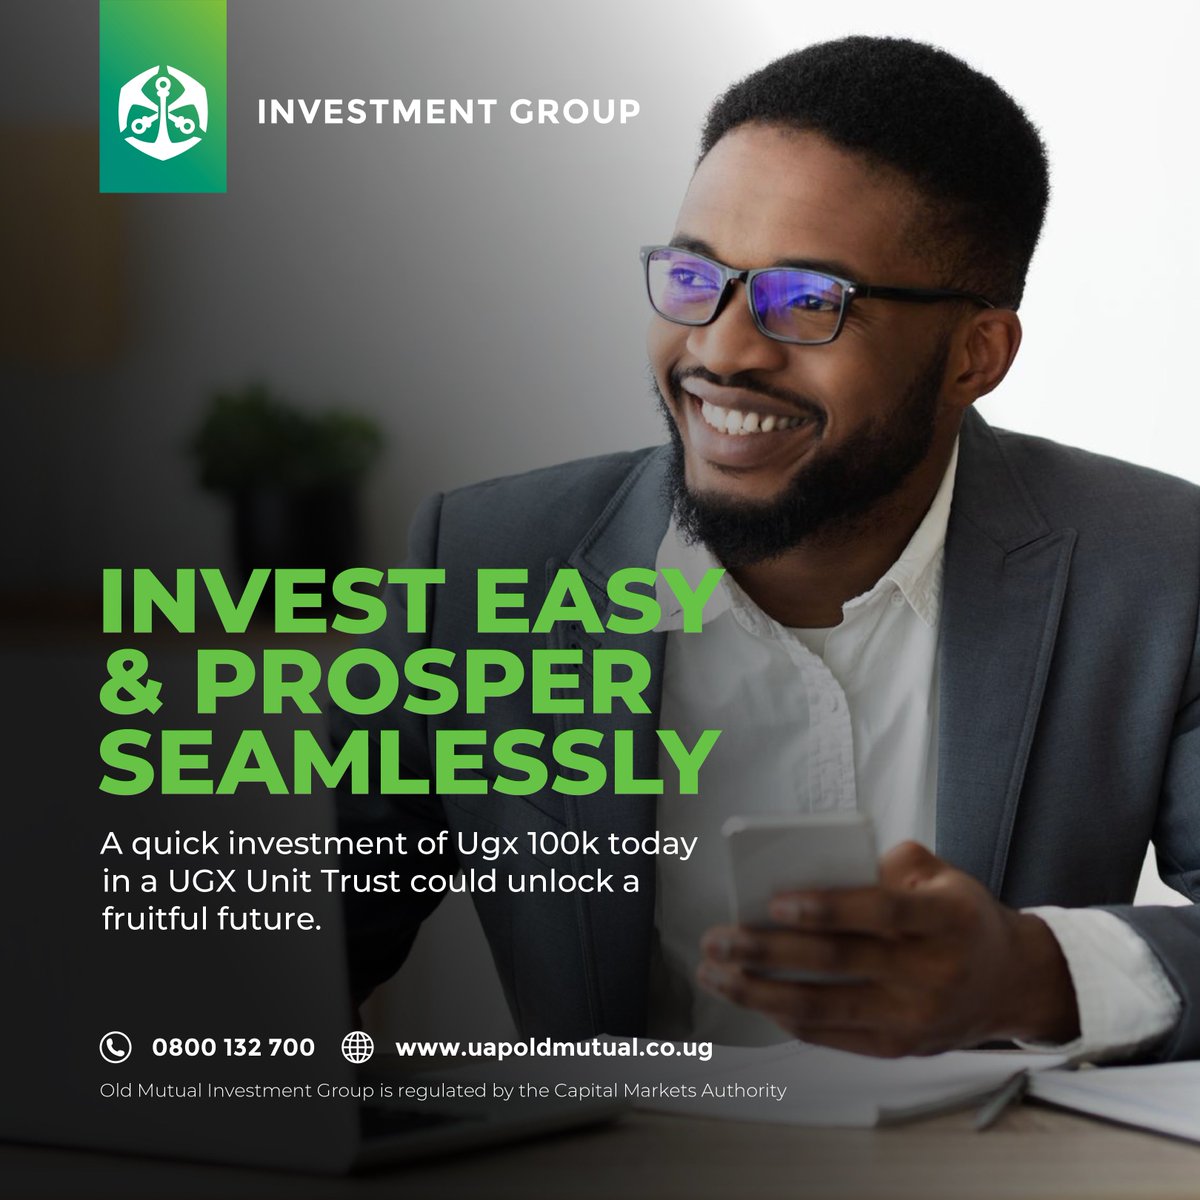 Unlock the power of your money with UGX Unit Trusts! Invest with as little as 100,000 UGX and enjoy tax-efficient wealth growth. Sign up now and start earning daily returns .Click uapoldmutual.co.ug/personal/save-…, for more information. #TutambuleFfena